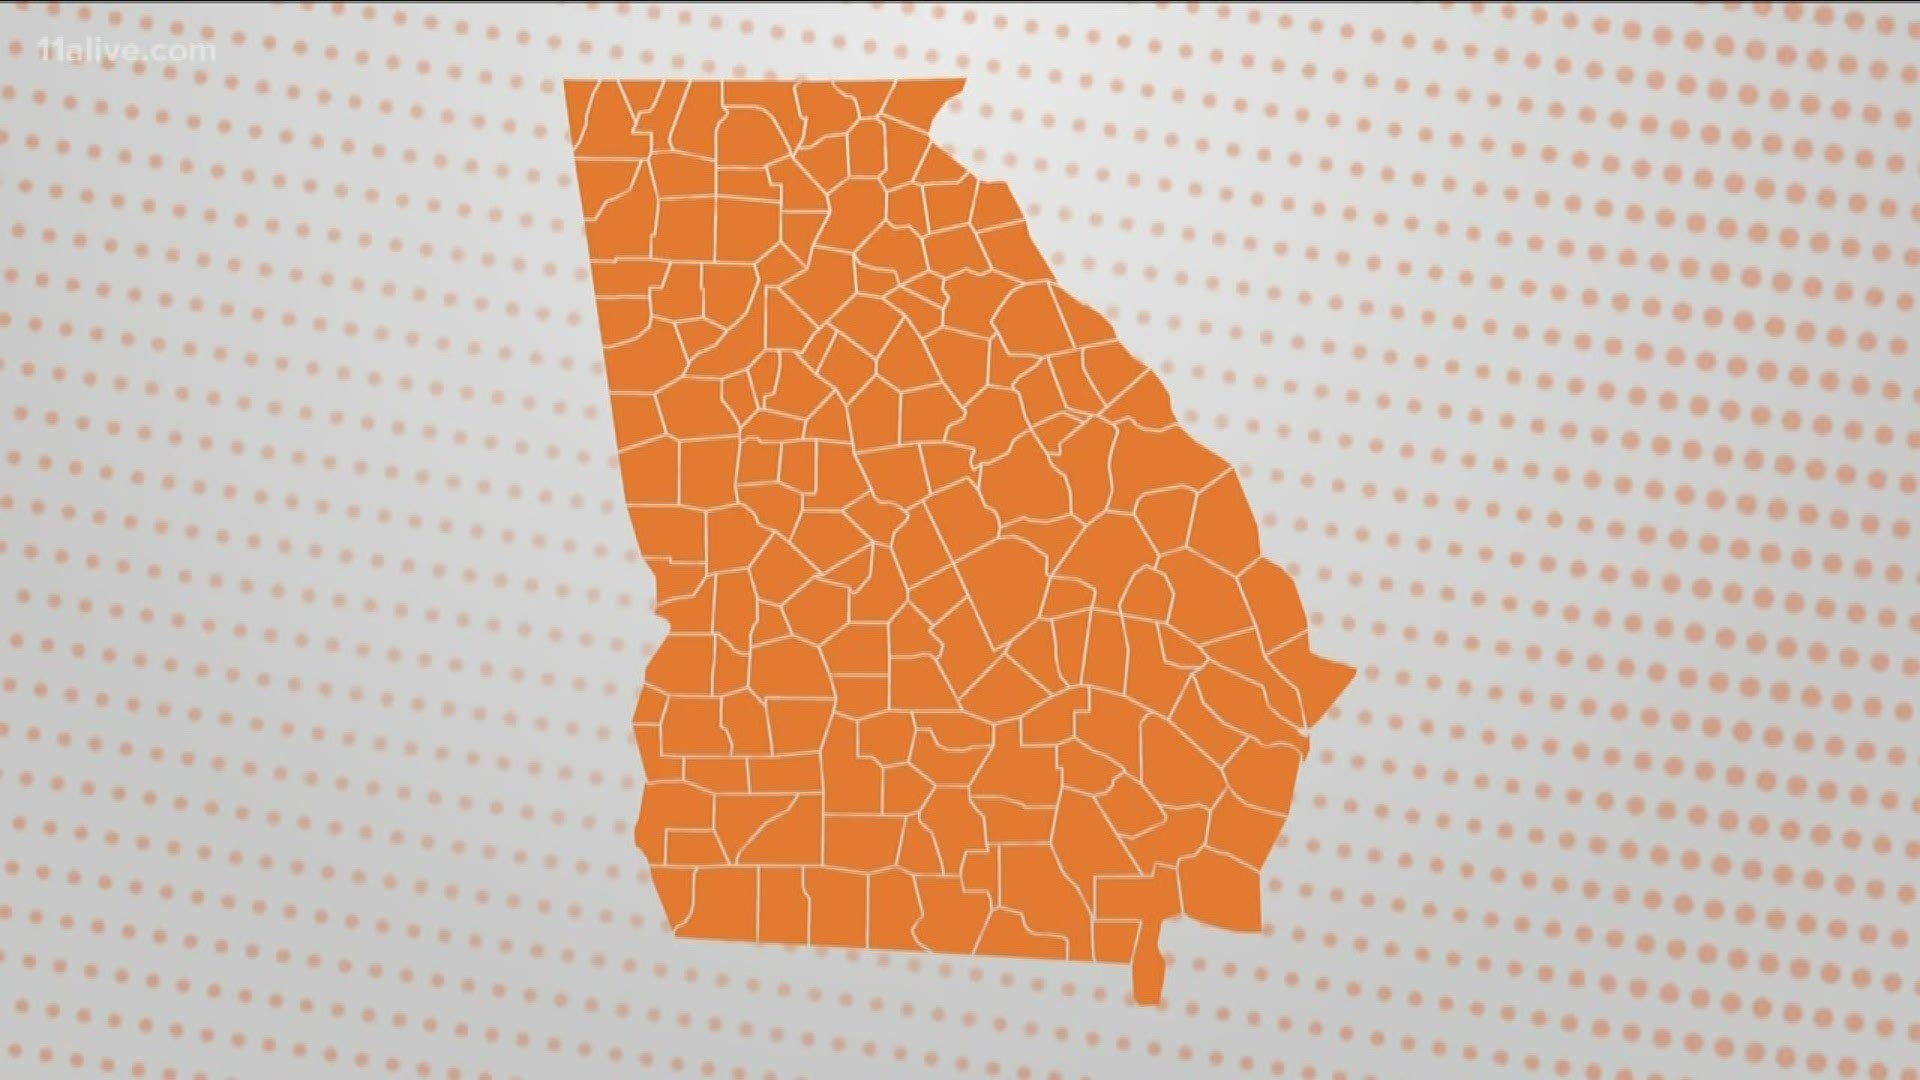 We may be number eight in population size, but we're number two when it comes to counties. Jerry Carnes explains why that is.